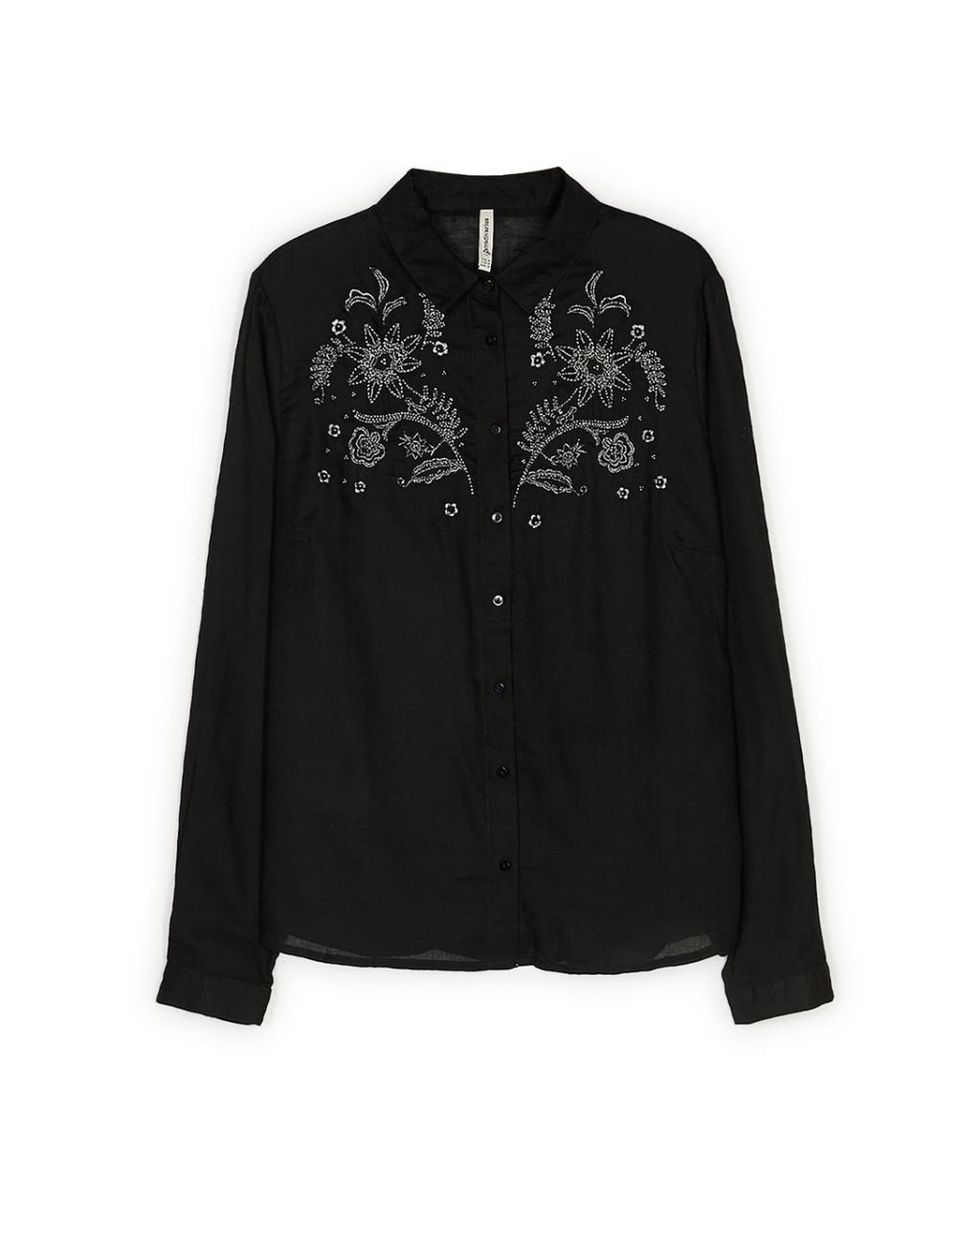 Clothing, Black, Outerwear, Sleeve, Blouse, Top, Shirt, Jacket, Collar, Embroidery, 